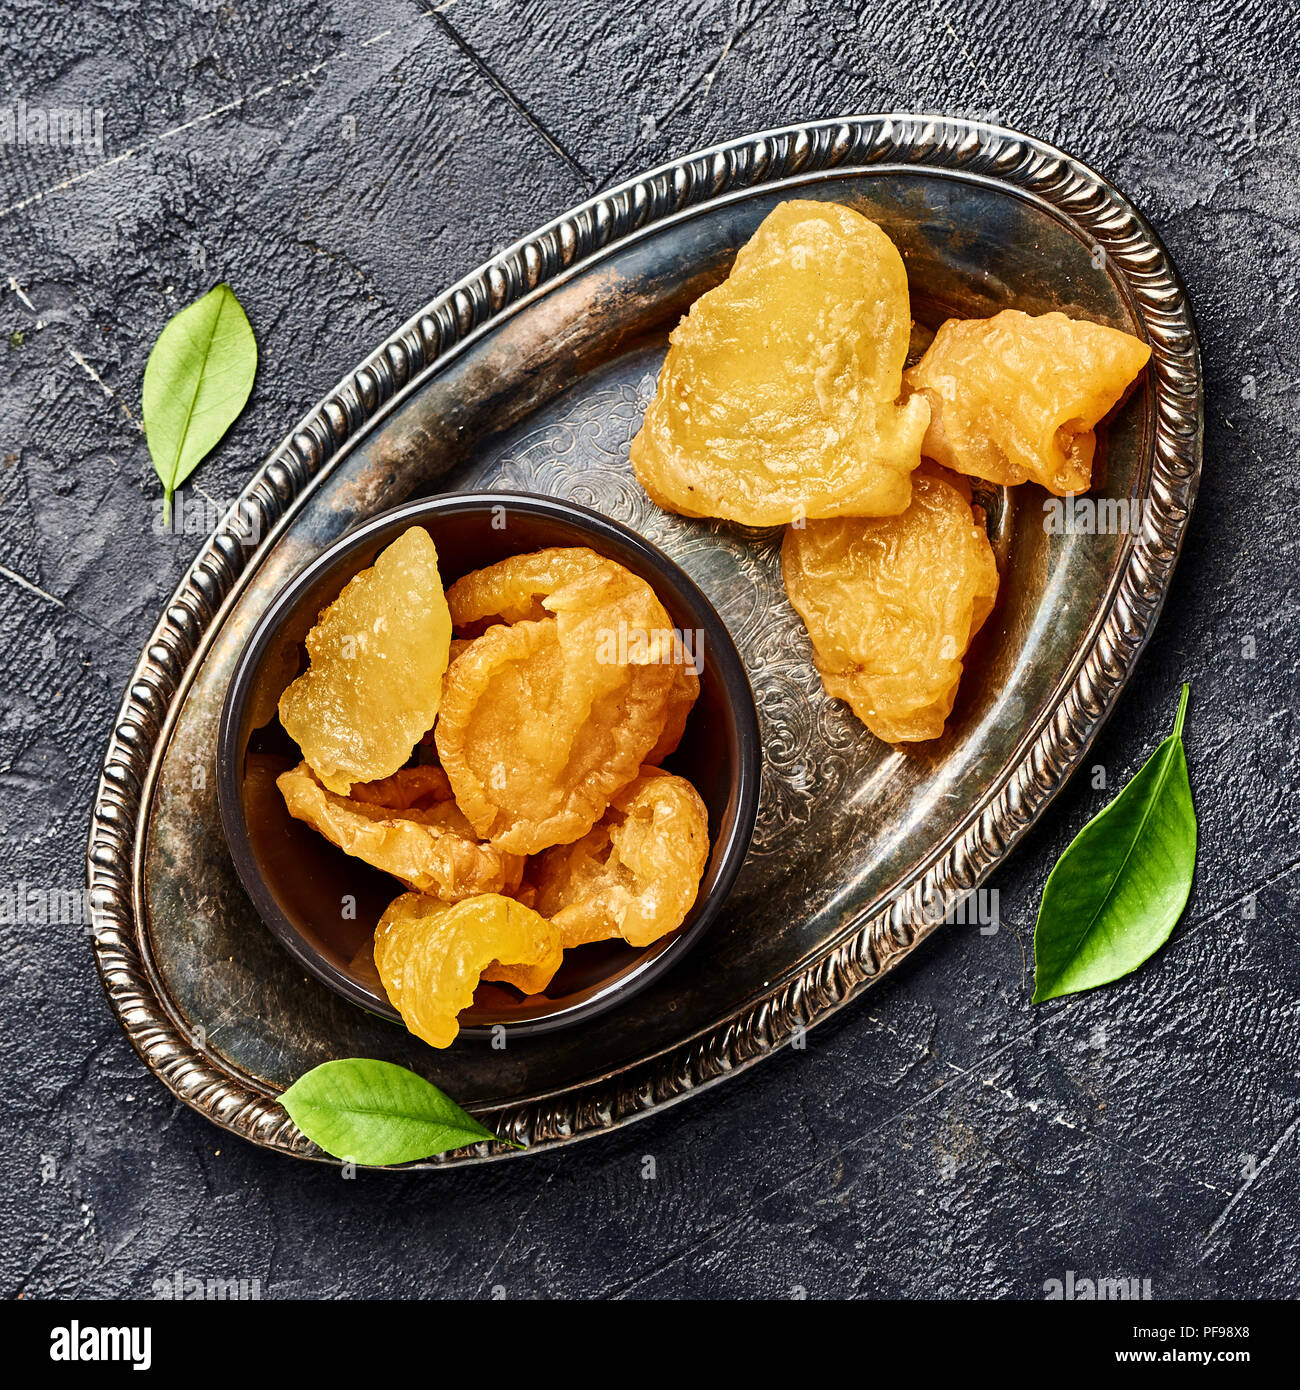 Dried pear, apricot or peach on black background. Top view of candied fruits. Stock Photo